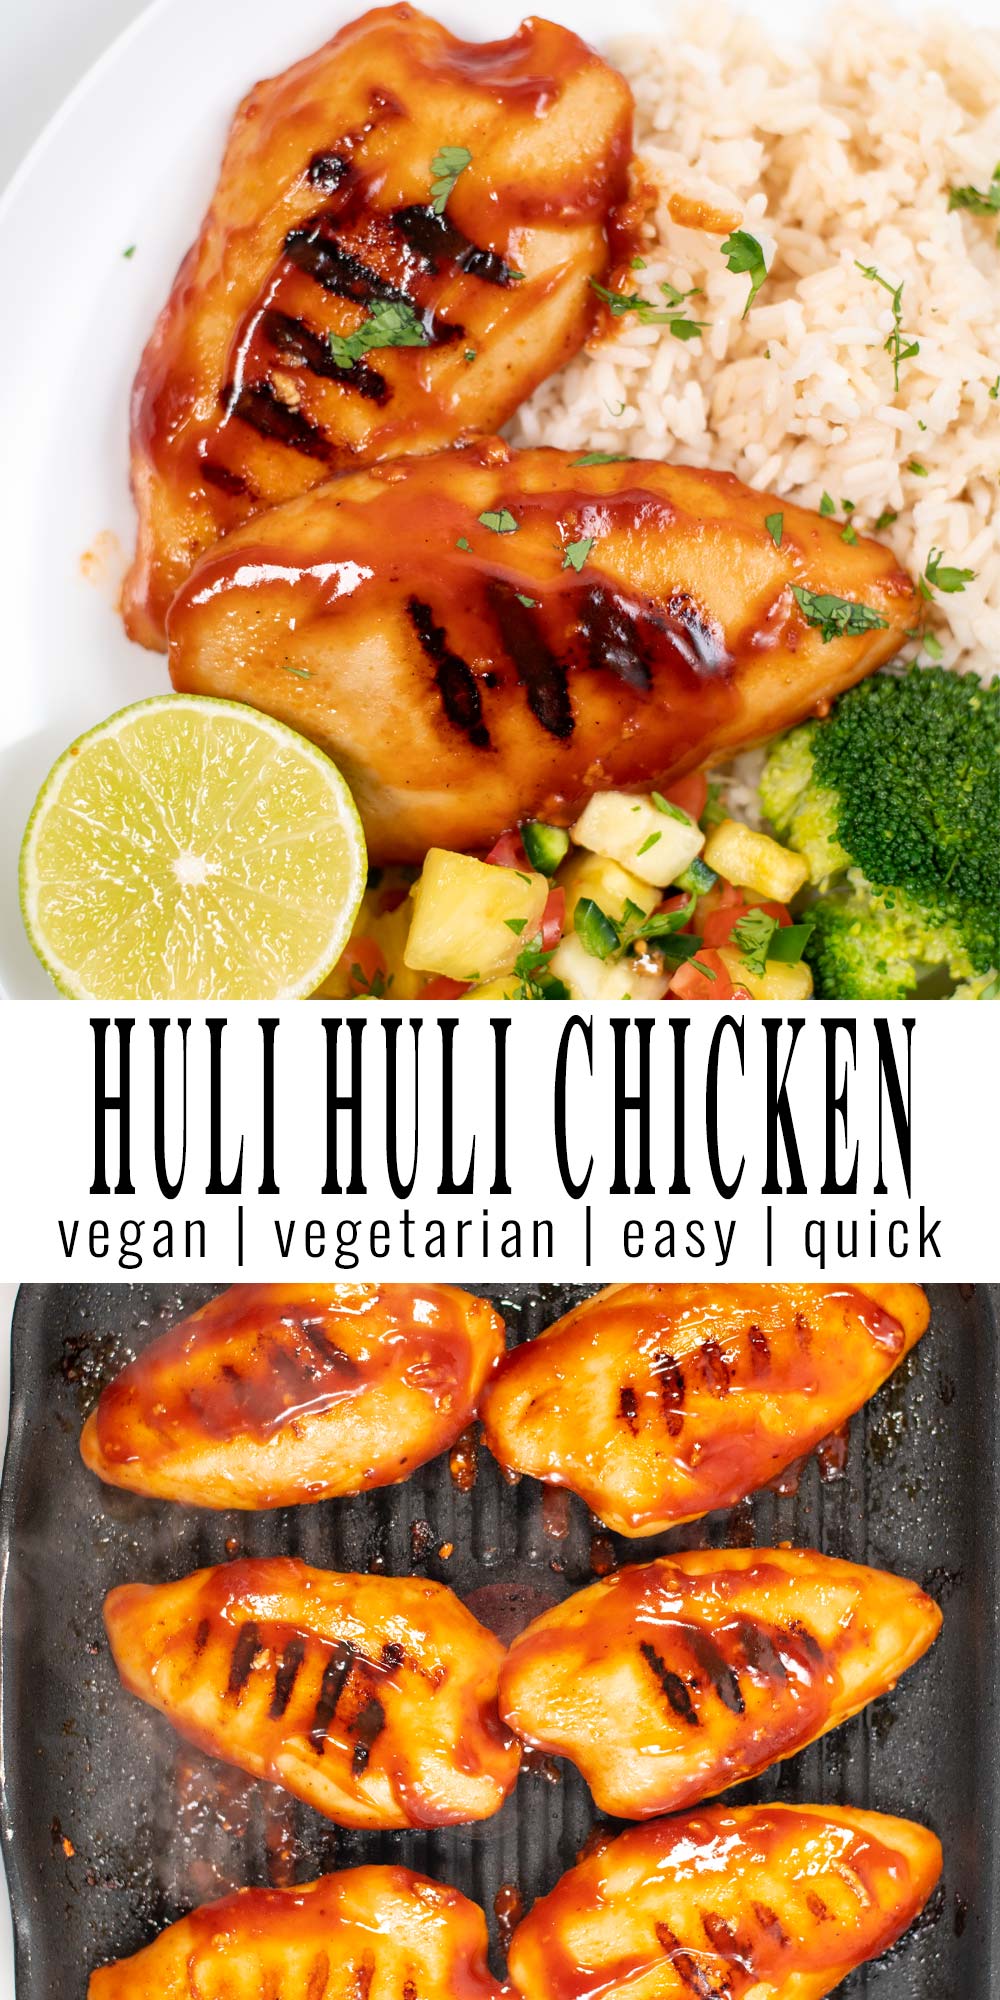 Collage of two pictures of Huli Huli Chicken, with recipe title text.